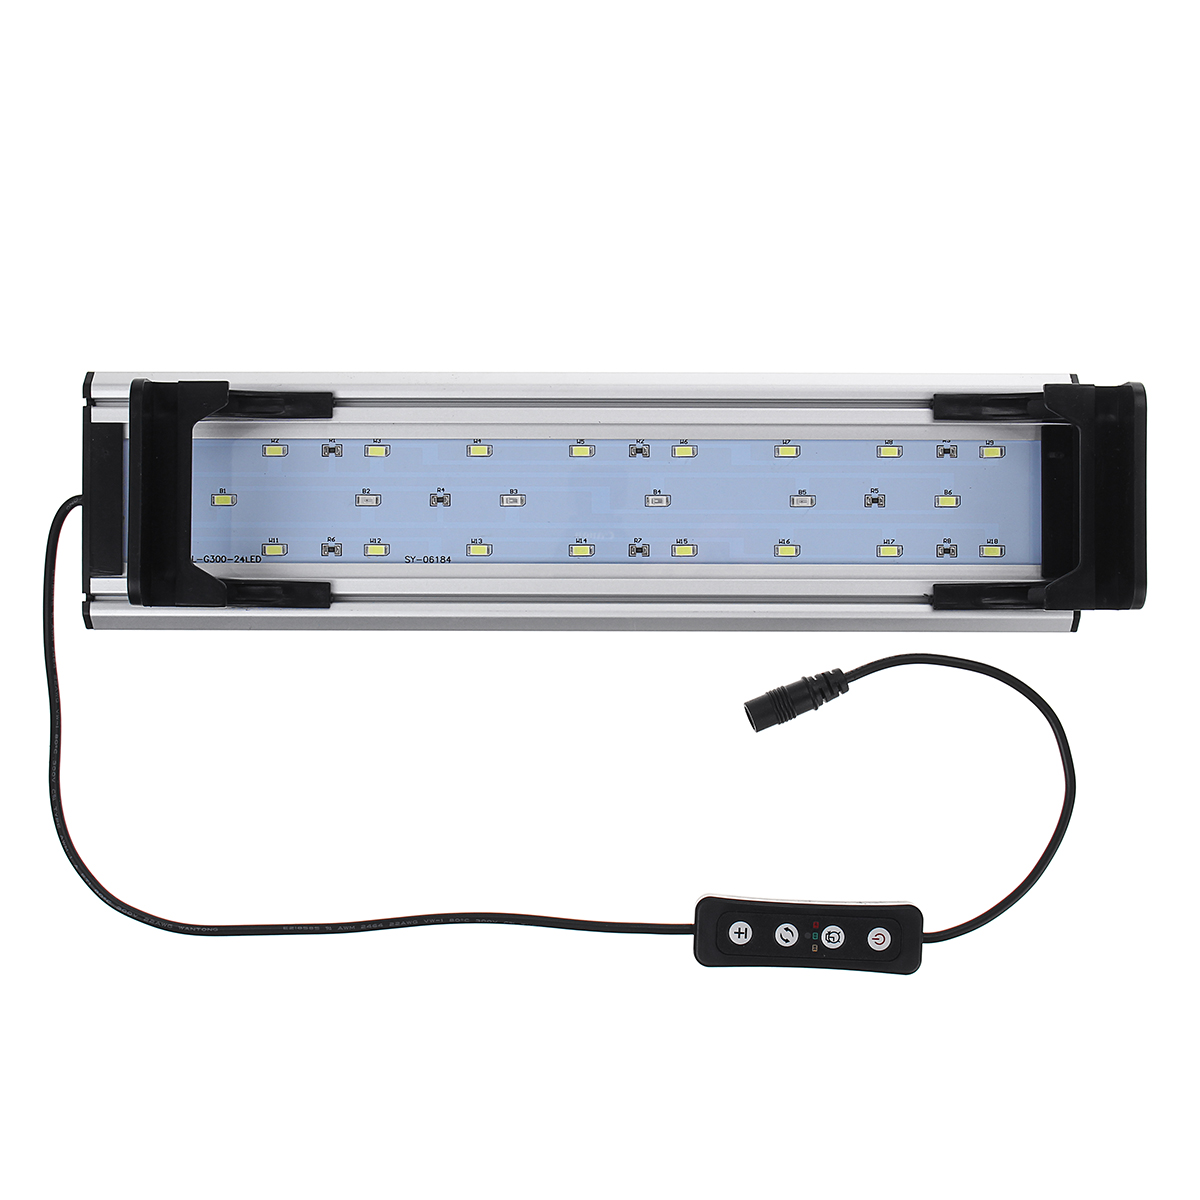 Dimmable--Timer-LED-Fish-Tank-Light-Lamp-Hood-Aquarium-Lighting-with-Extendable-Brackets-for-30CM-Ta-1639937-4